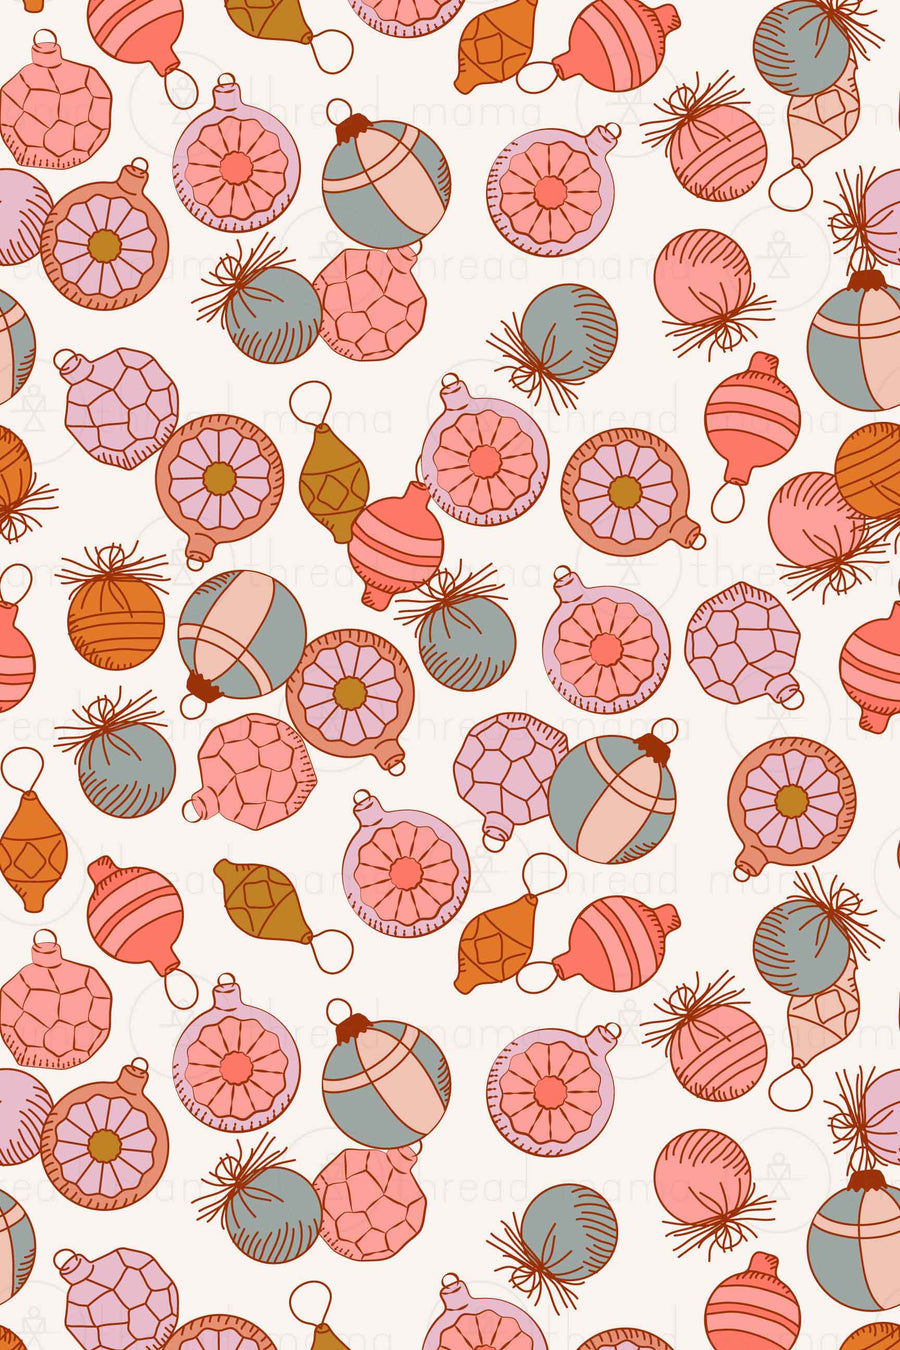 Repeating Pattern 132D (Seamless)